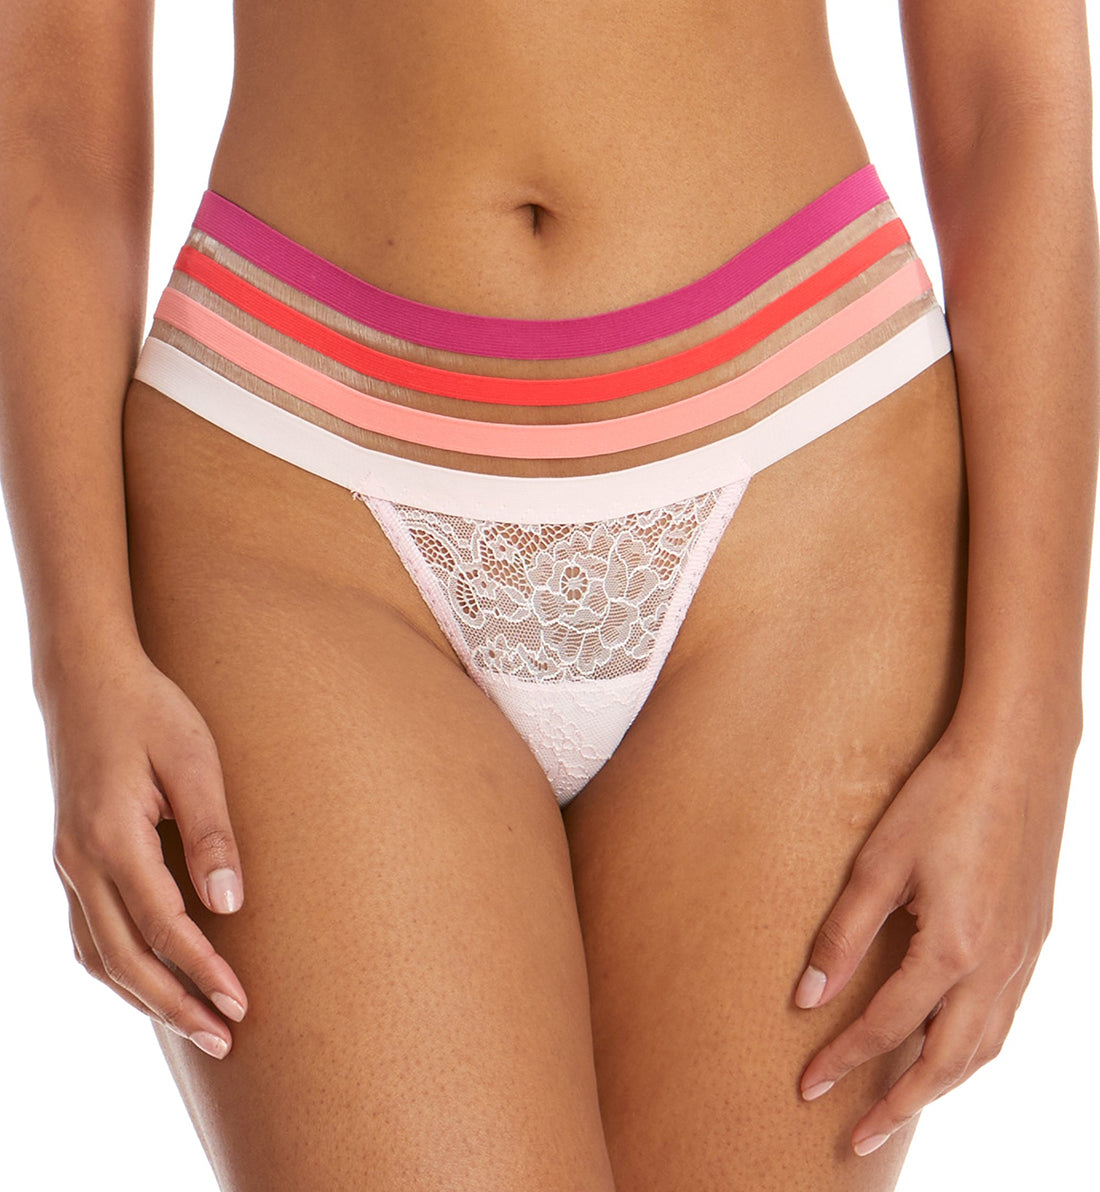 Hanky Panky Sunset Stripe Modern Low Rise Thong (6G1312),XS/S,Rosy Peach - Rosy Peach,XS/S